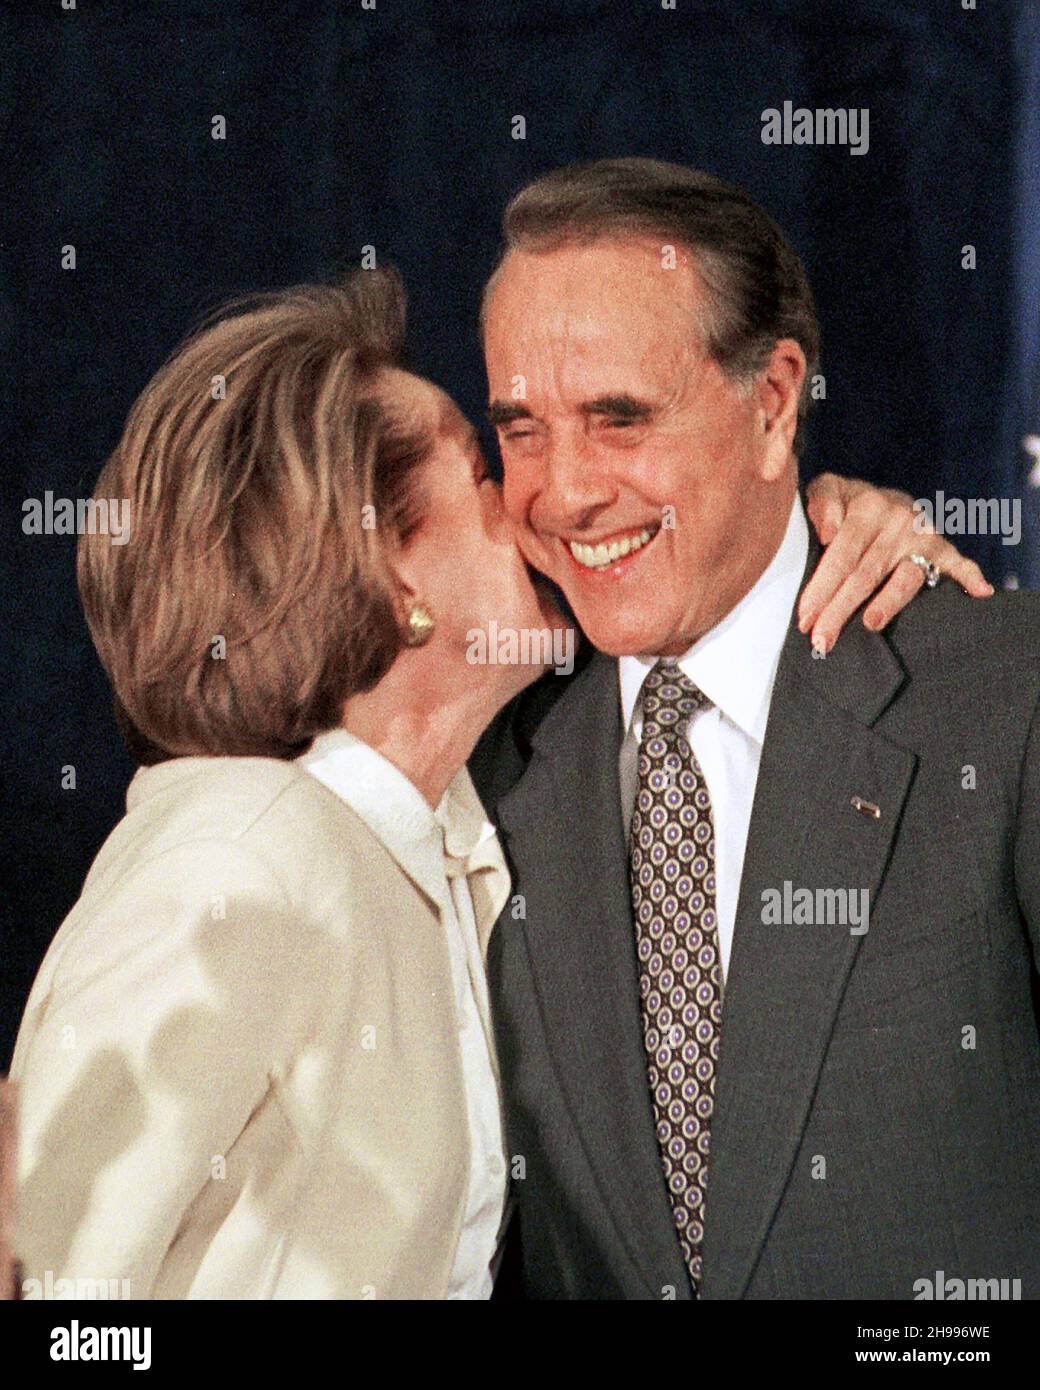 **FILE PHOTO** Bob Dole Has Passed Away at 98. Elizabeth Dole kisses her husband, former United States Senator Bob Dole (Republican of Kansas), the 1996 Republican nominee for US President during her announcement that she was withdrawing from the race for the Republican nomination for President in 2000 on 20 October, 1999. She cited her inability to raise the huge funds necessary to compete with George W. Bush and Steve Forbes. Credit: Ron Sachs/CNP/MediaPunch Stock Photo